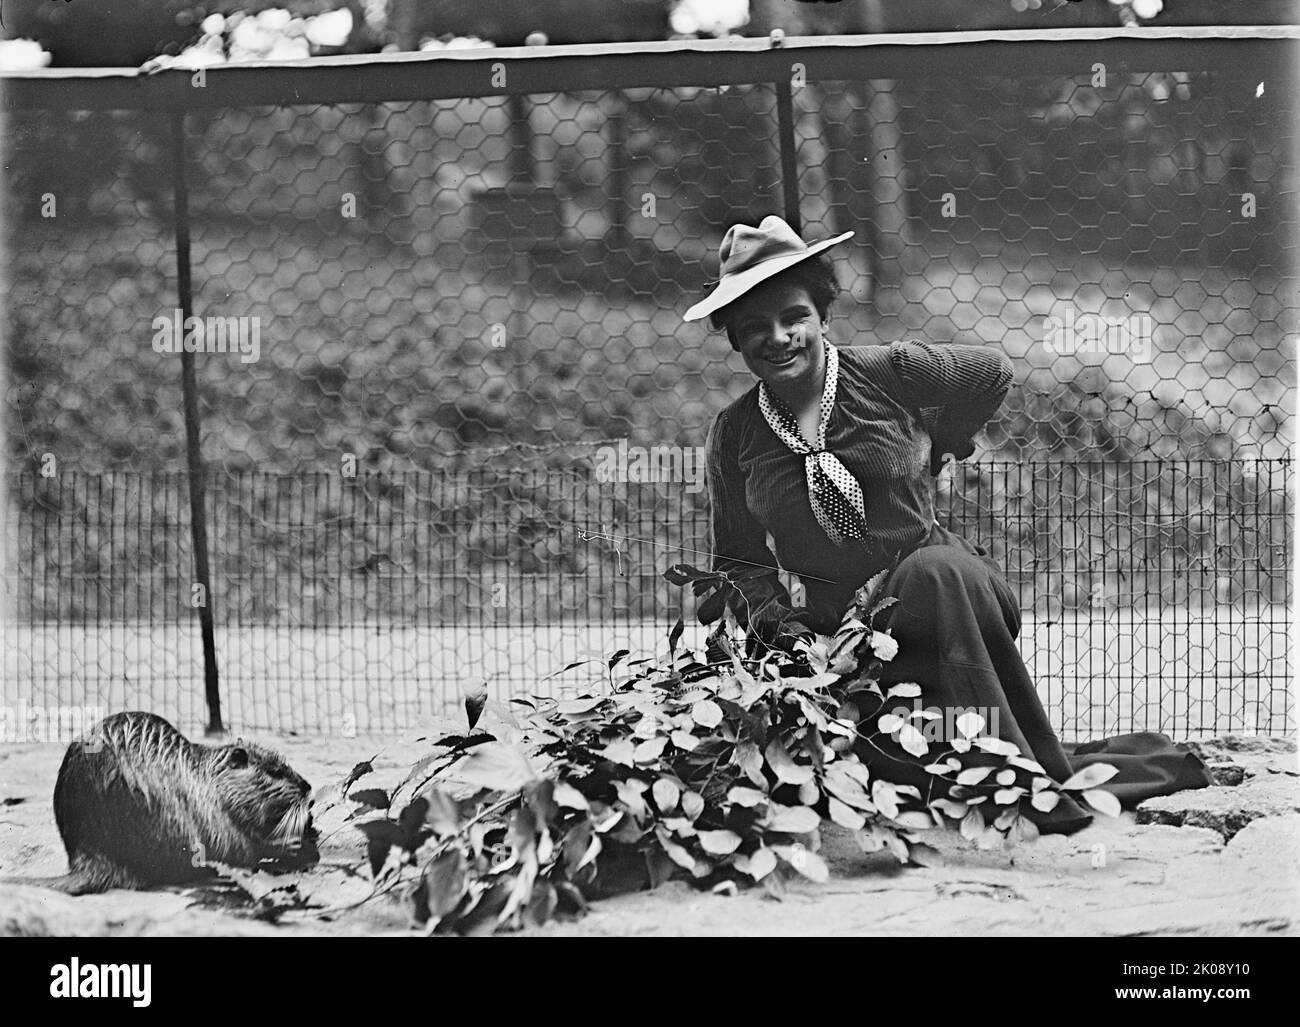 Mrs. Franklin Adams, nee Harriet Chalmers, at Zoo, 1912. [American explorer, writer and photographer Harriet Chalmers Adams. She lectured frequently on her extensive travels in South America, Asia and the South Pacific, and illustrated her talks with colour slides and films. She also published accounts of her journeys in National Geographic magazine. Married to Franklin Pierce Adams]. Stock Photo